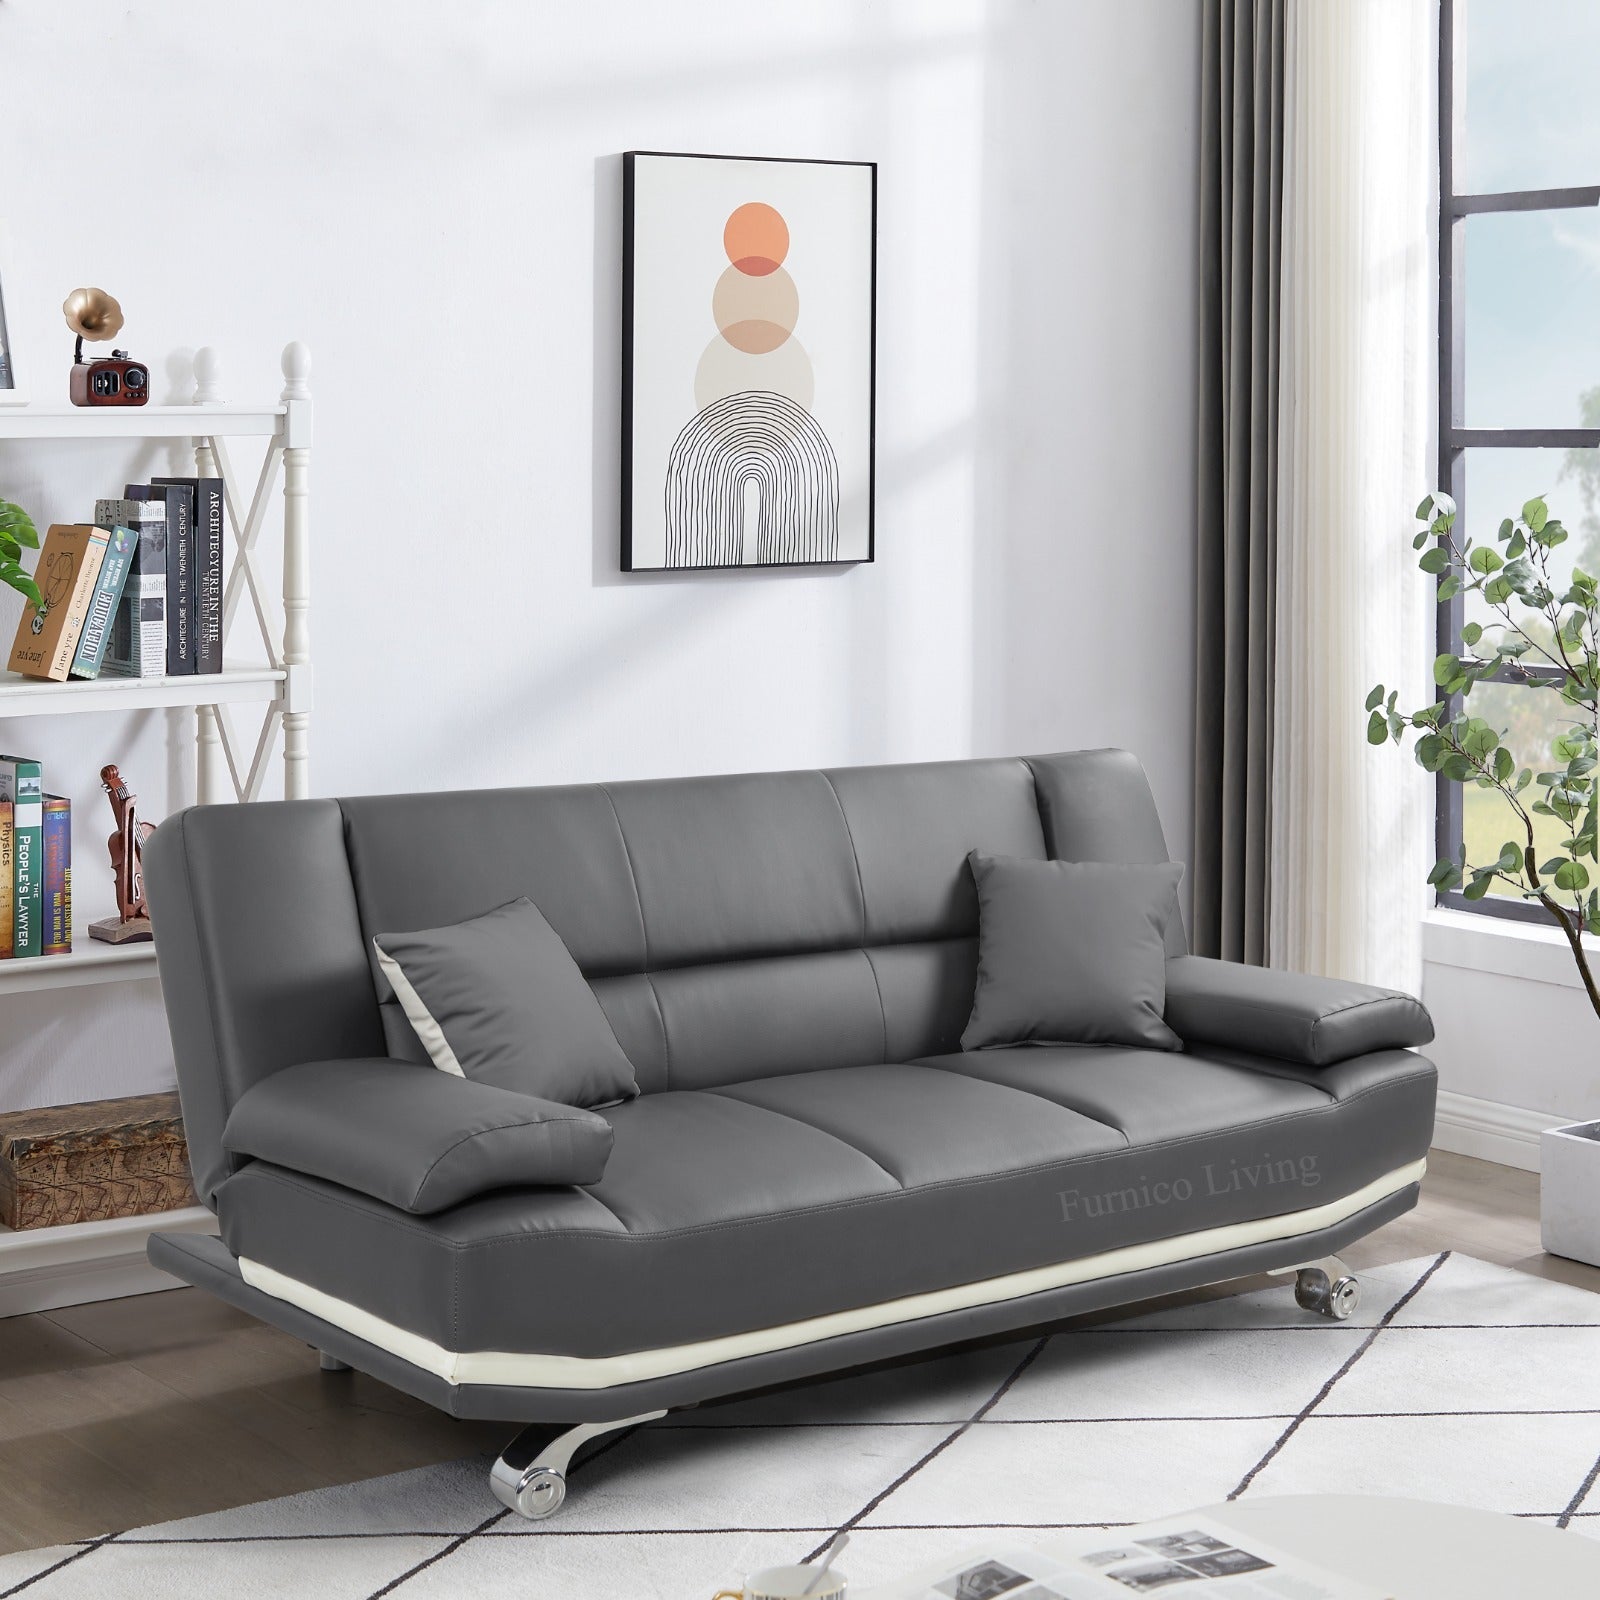 Milan leather Sofa Bed